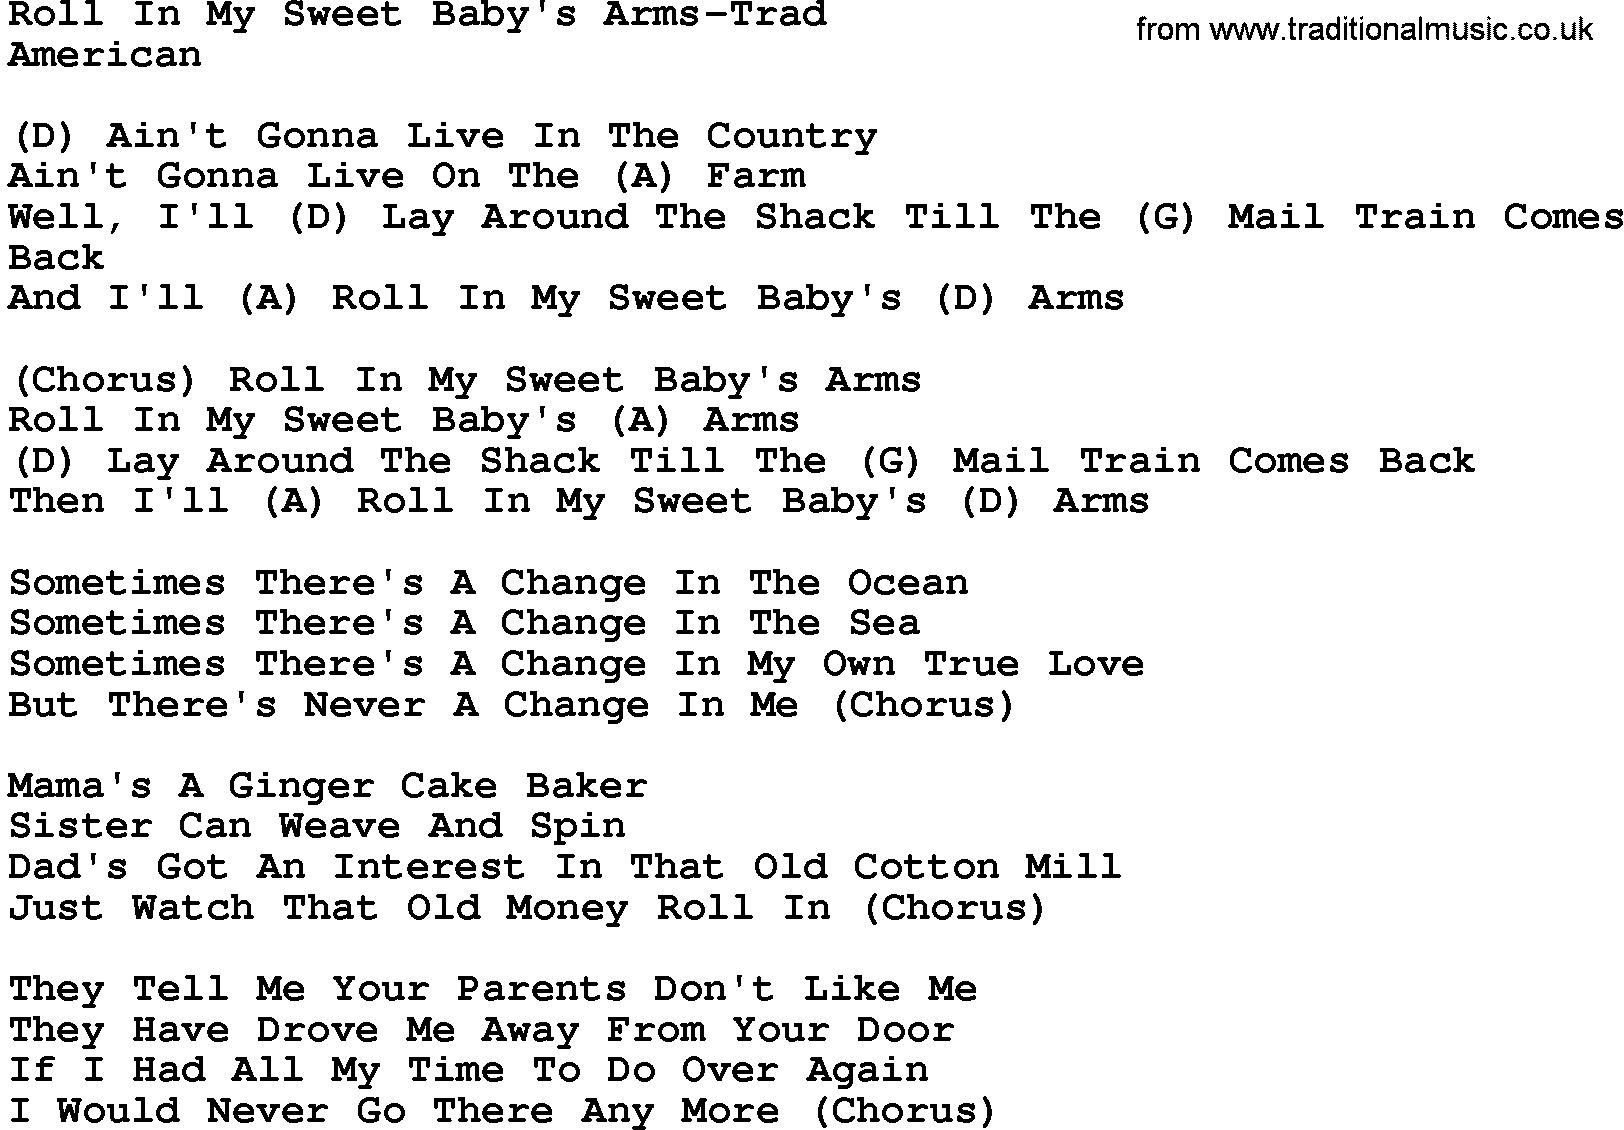 Country music song: Roll In My Sweet Baby's Arms-Trad lyrics and chords